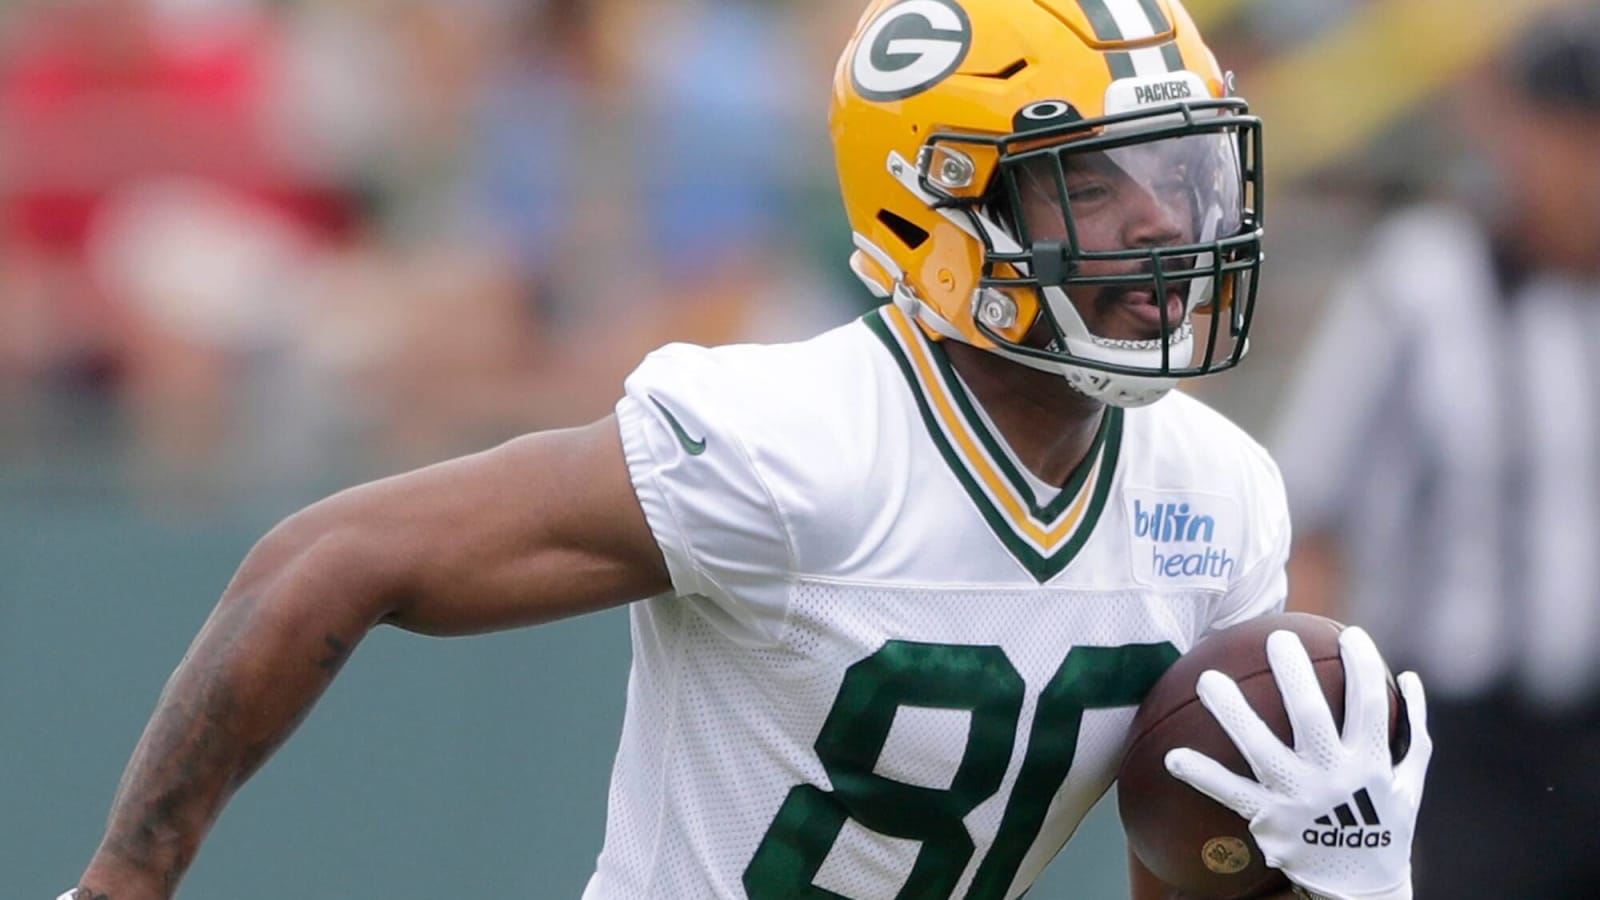 Bo Melton Making Strong Case To Earn Spot On Packers’ Roster